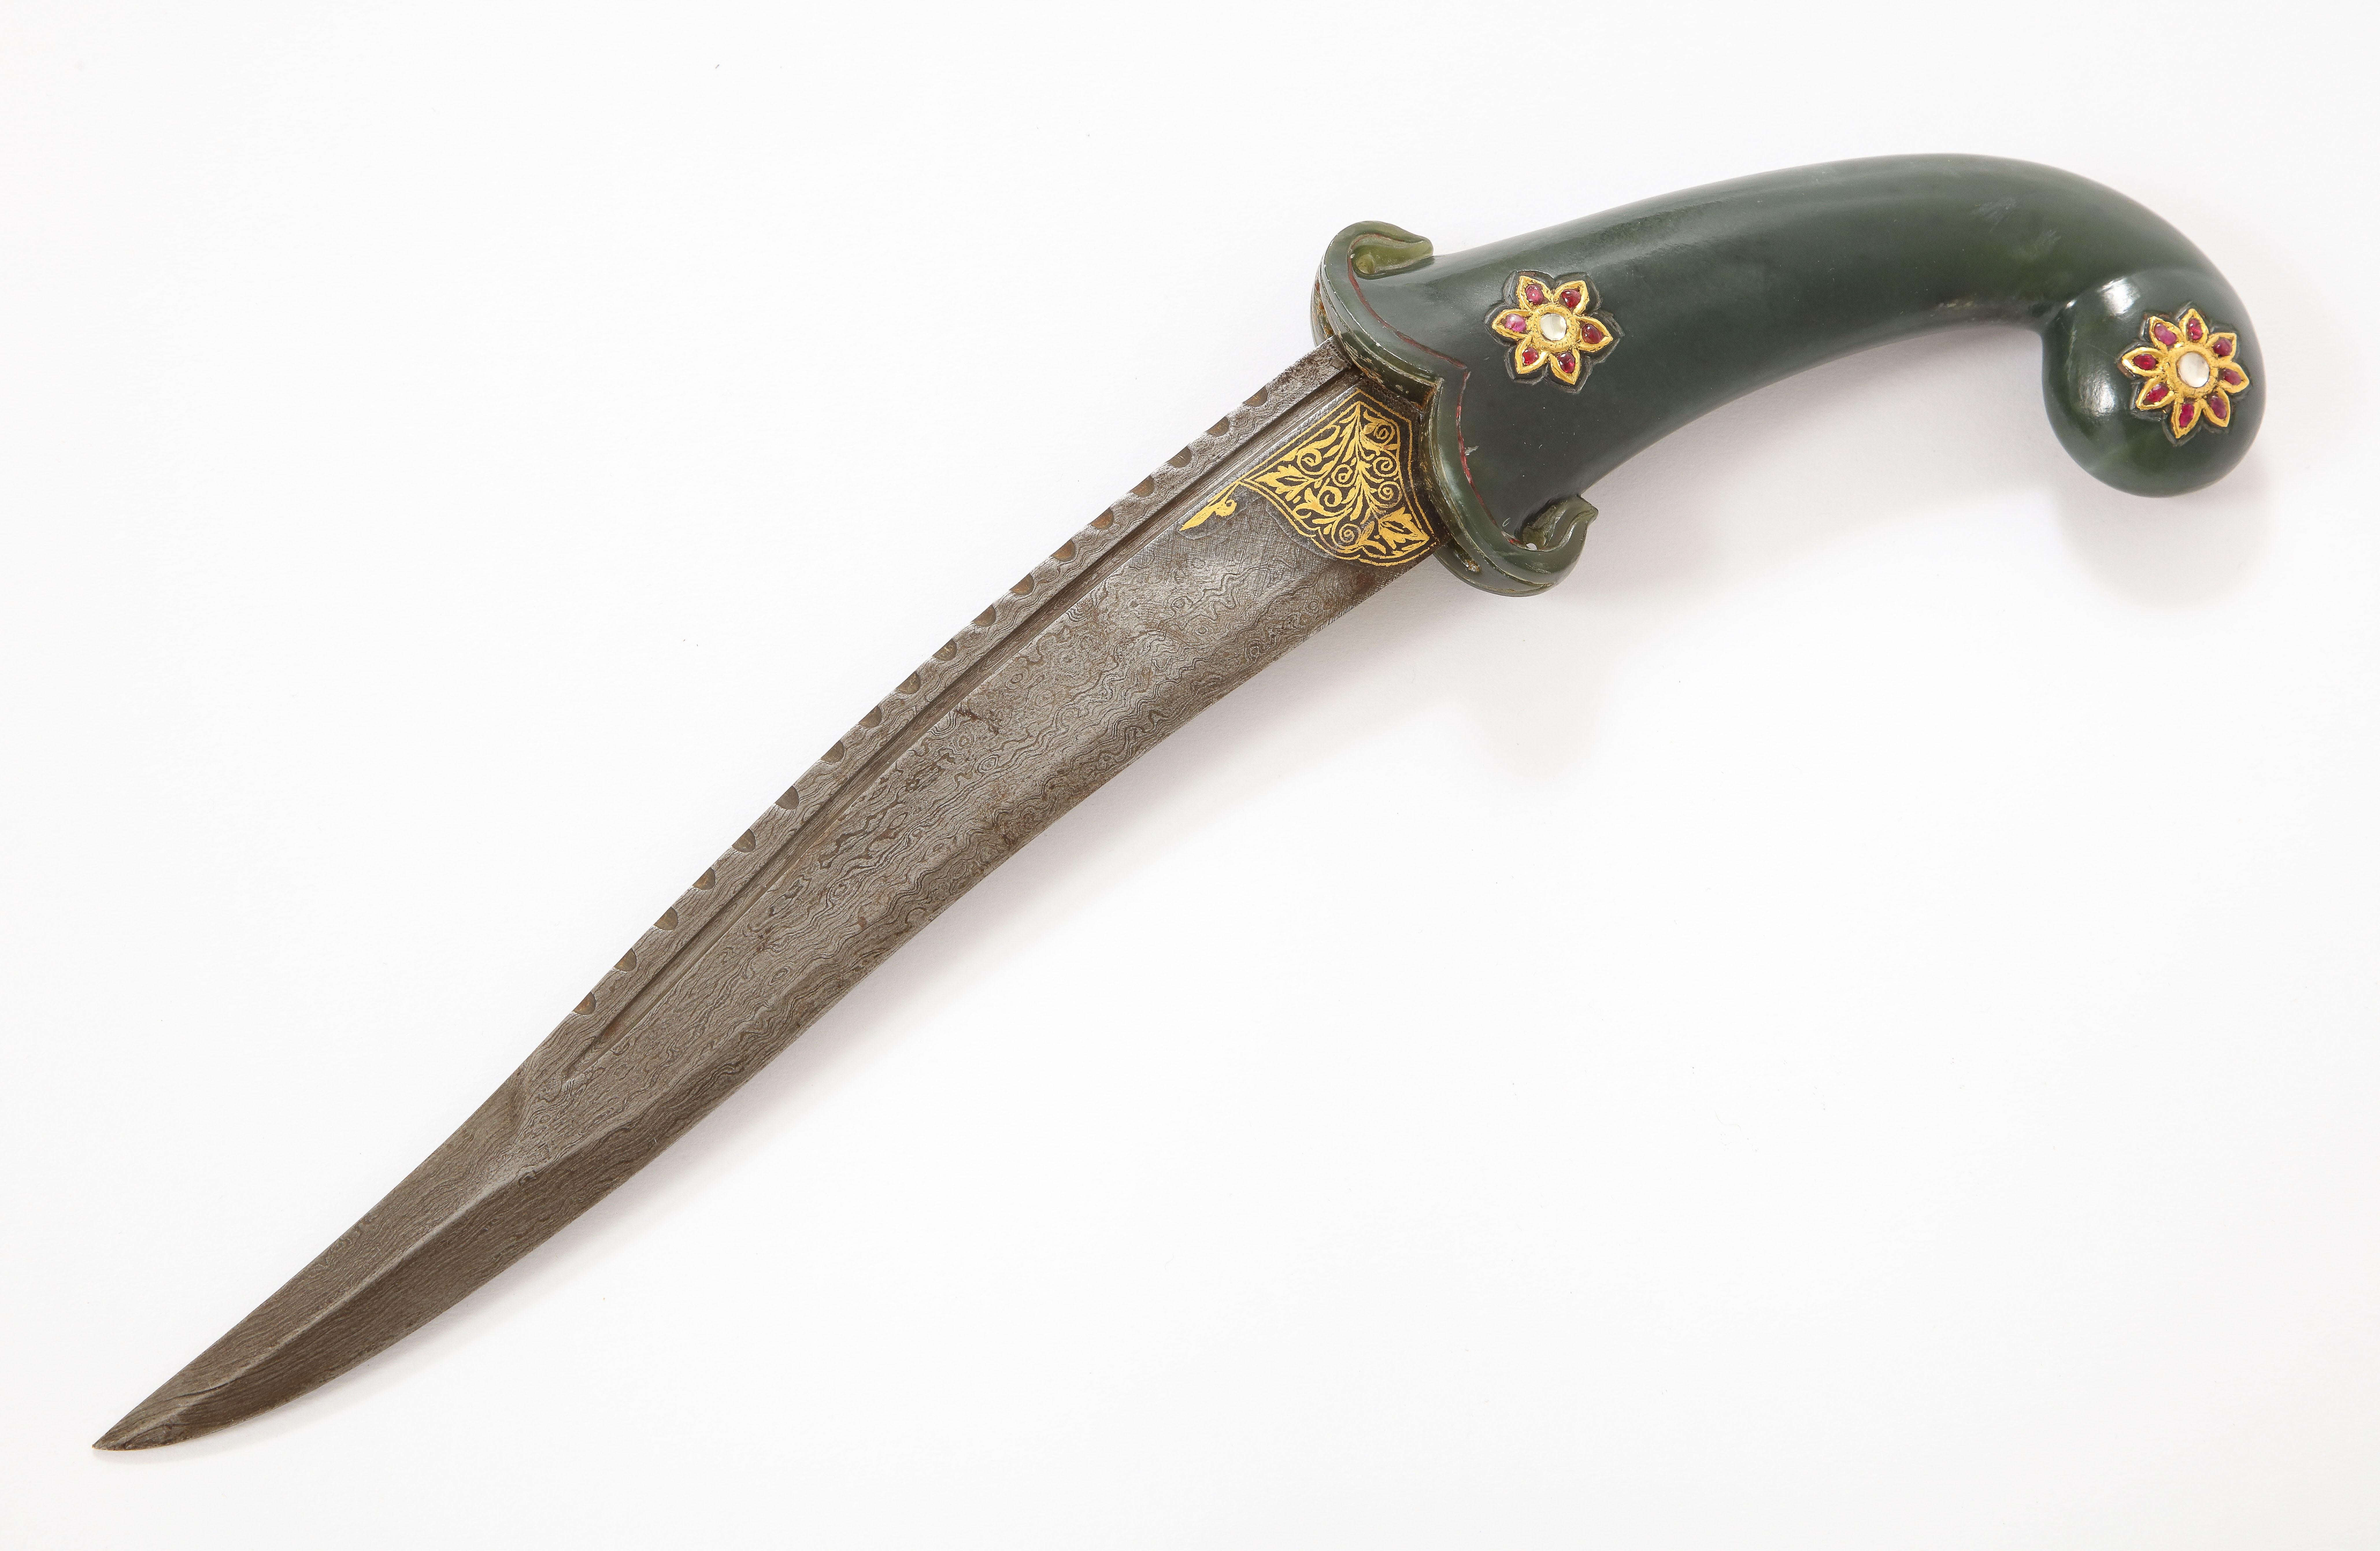 daggers with handles of jade